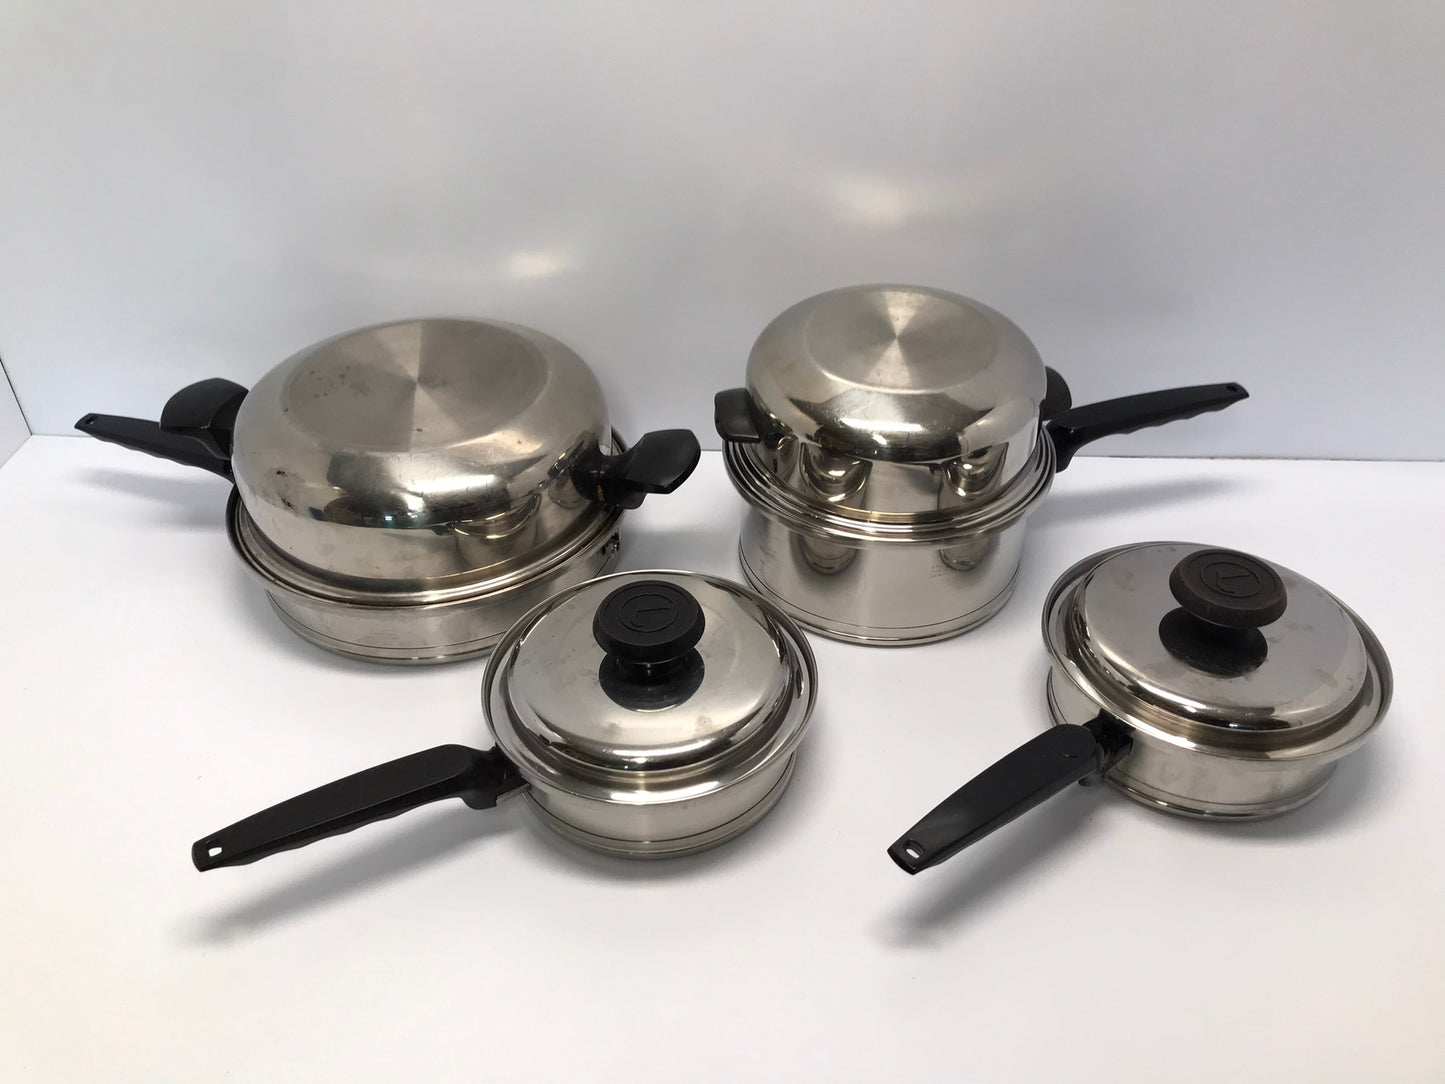 Lifetime Stainless Steel Cookware Set Lifetime Warranty 10 Piece With Dome Pot Lits and Reg Lids Like New